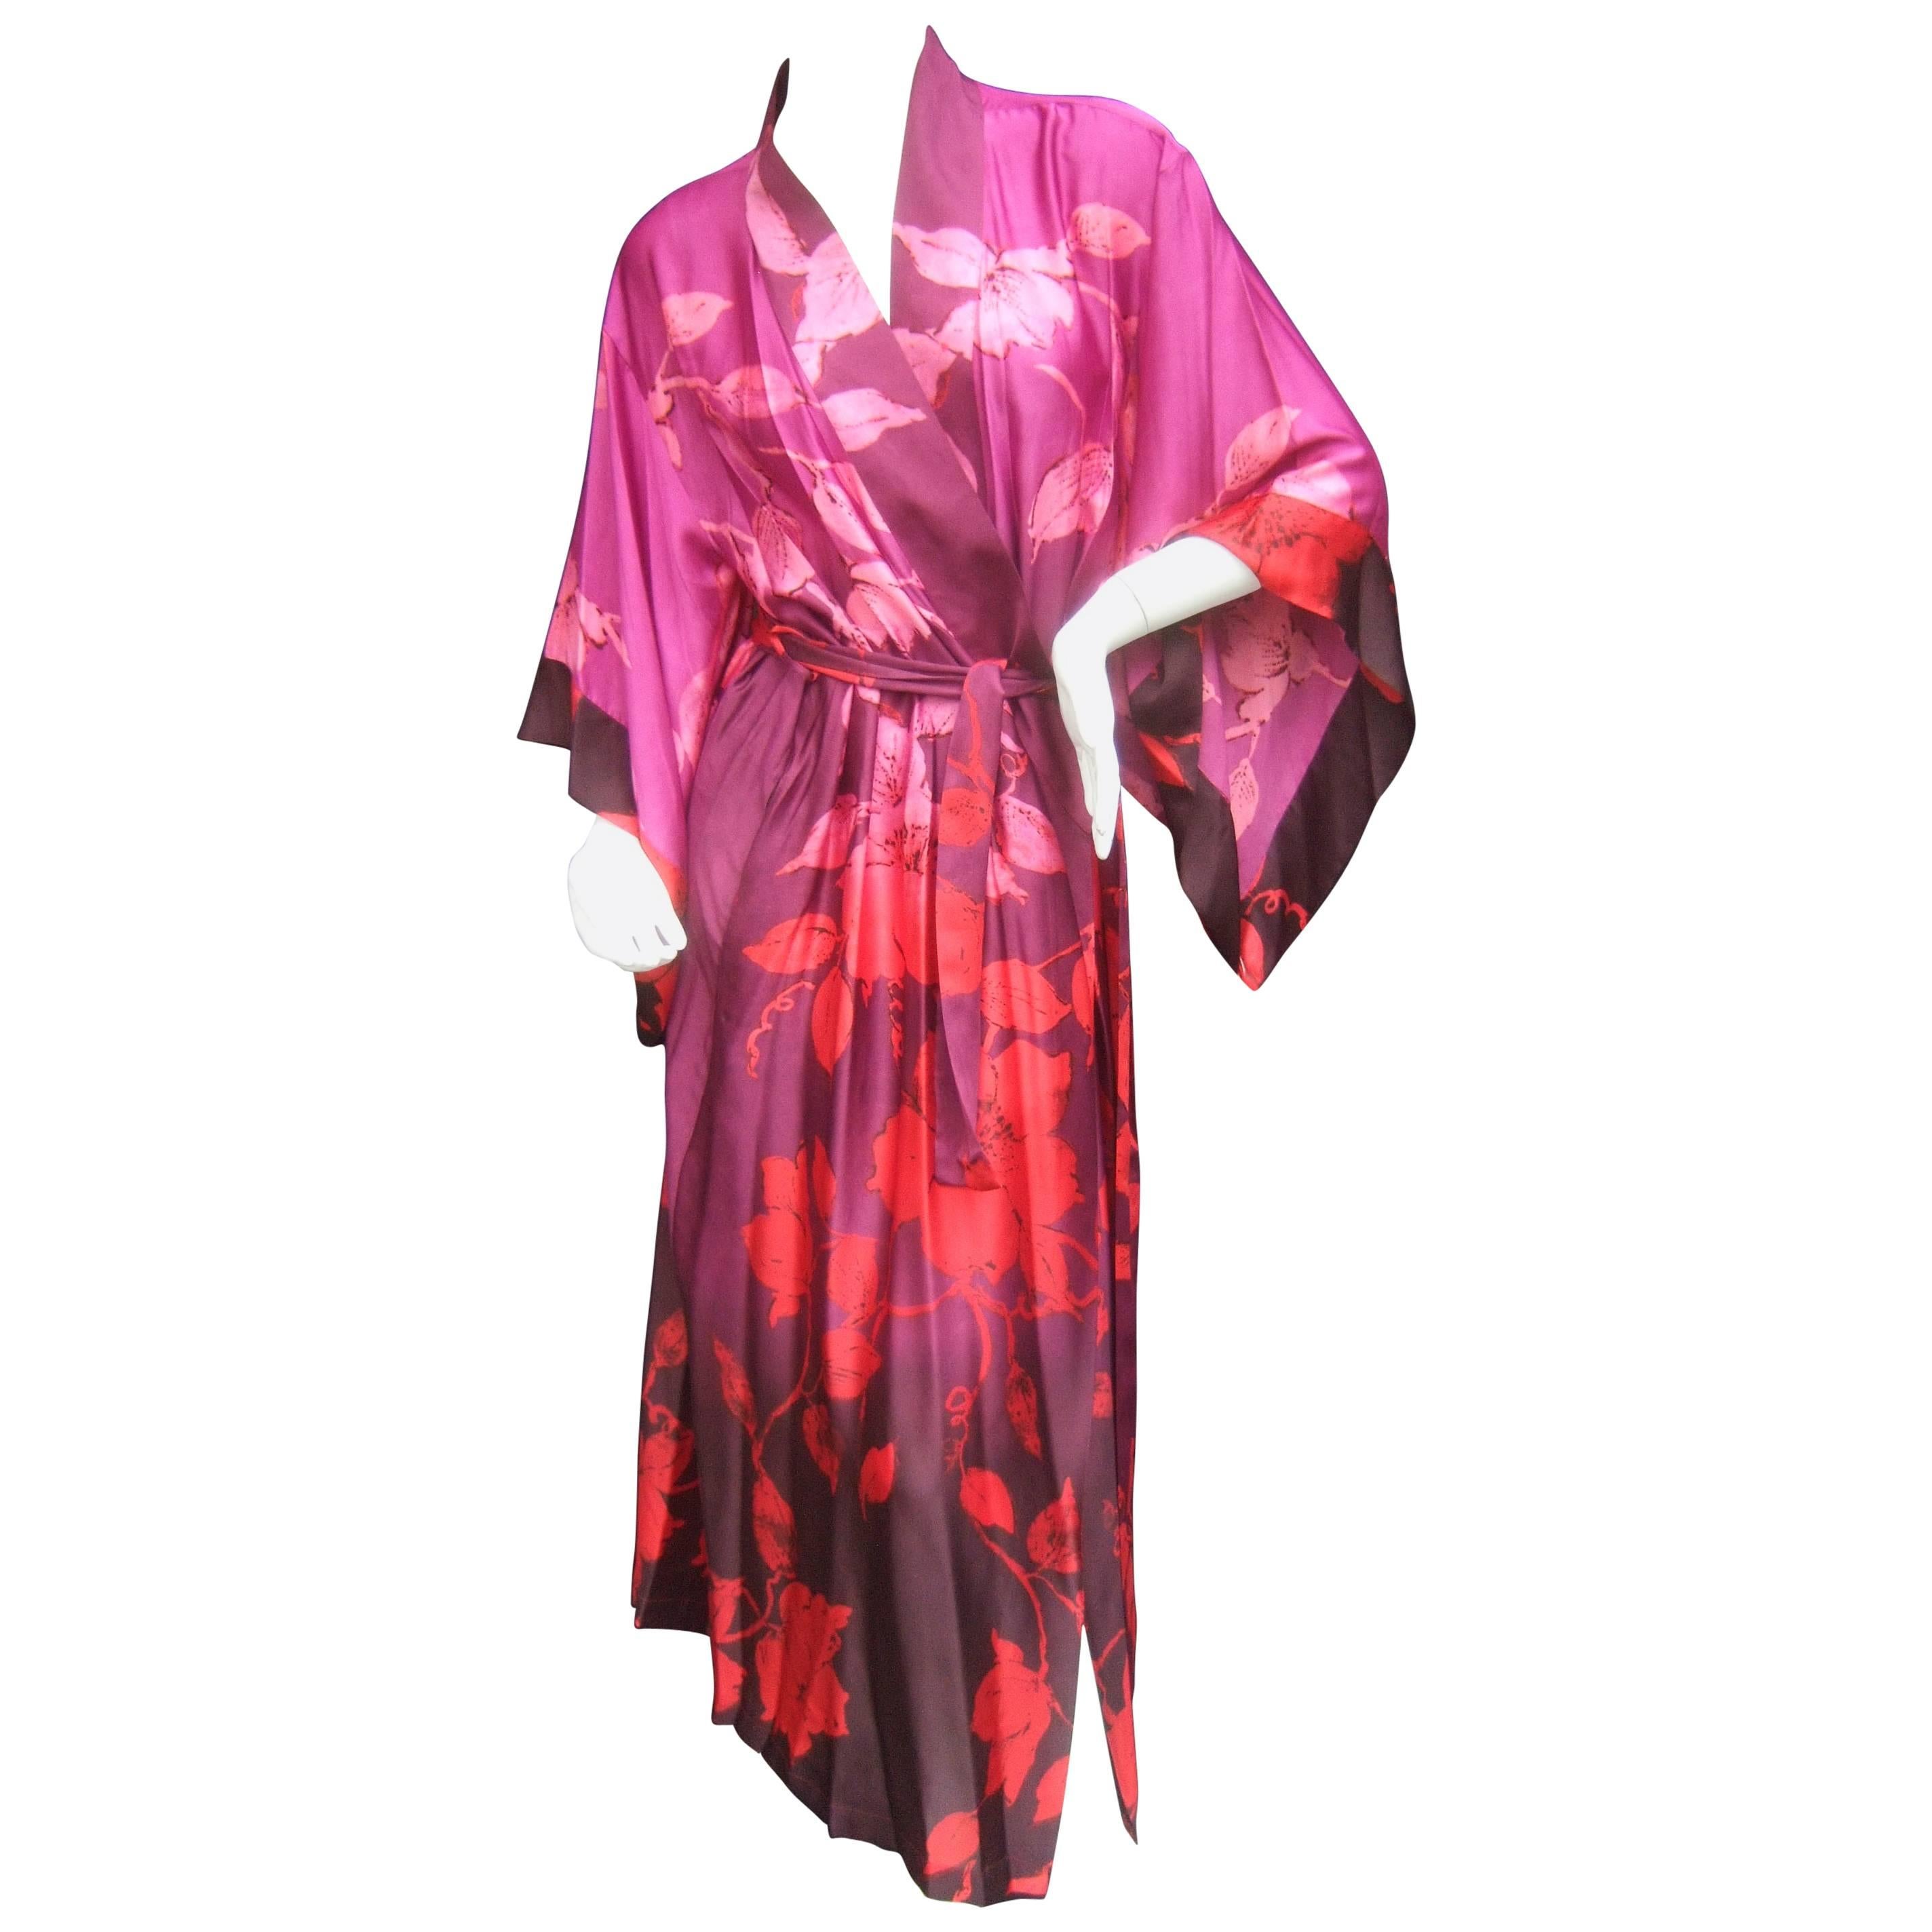 Natori Luxurious Floral Print Robe New With Tags 